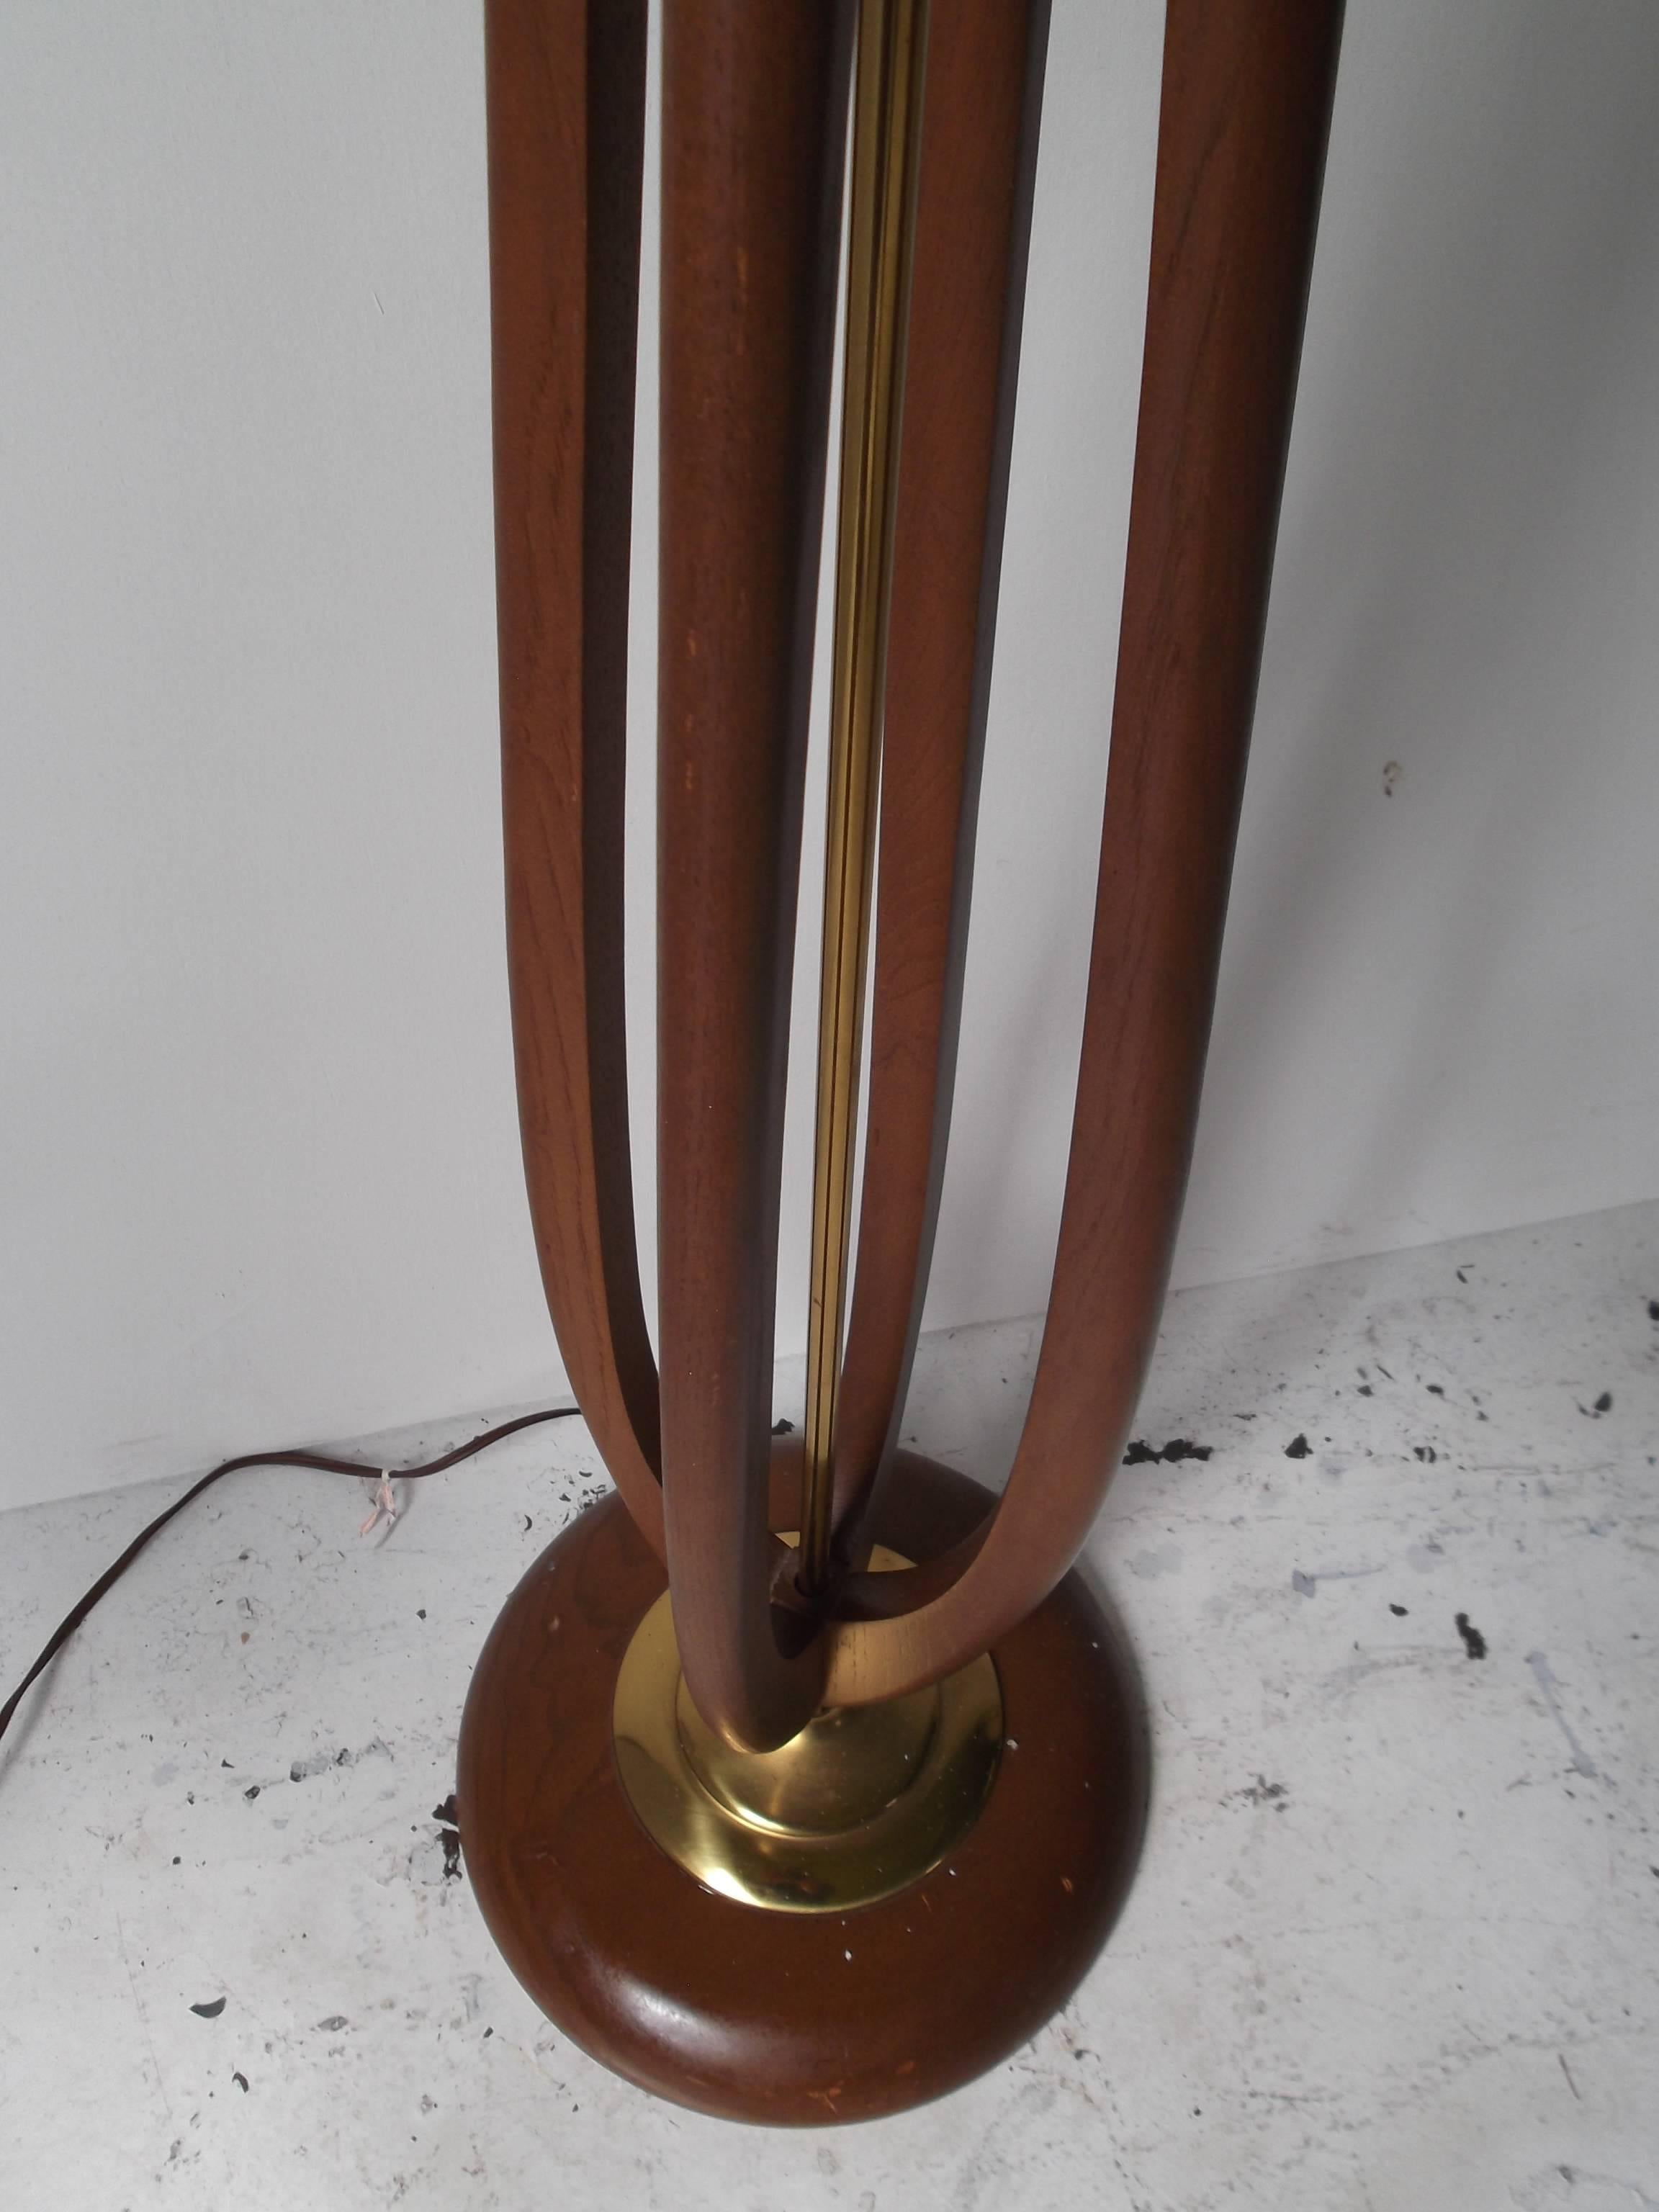 American Rembrandt Danish Modern Style Floor lamp with Wood Spines